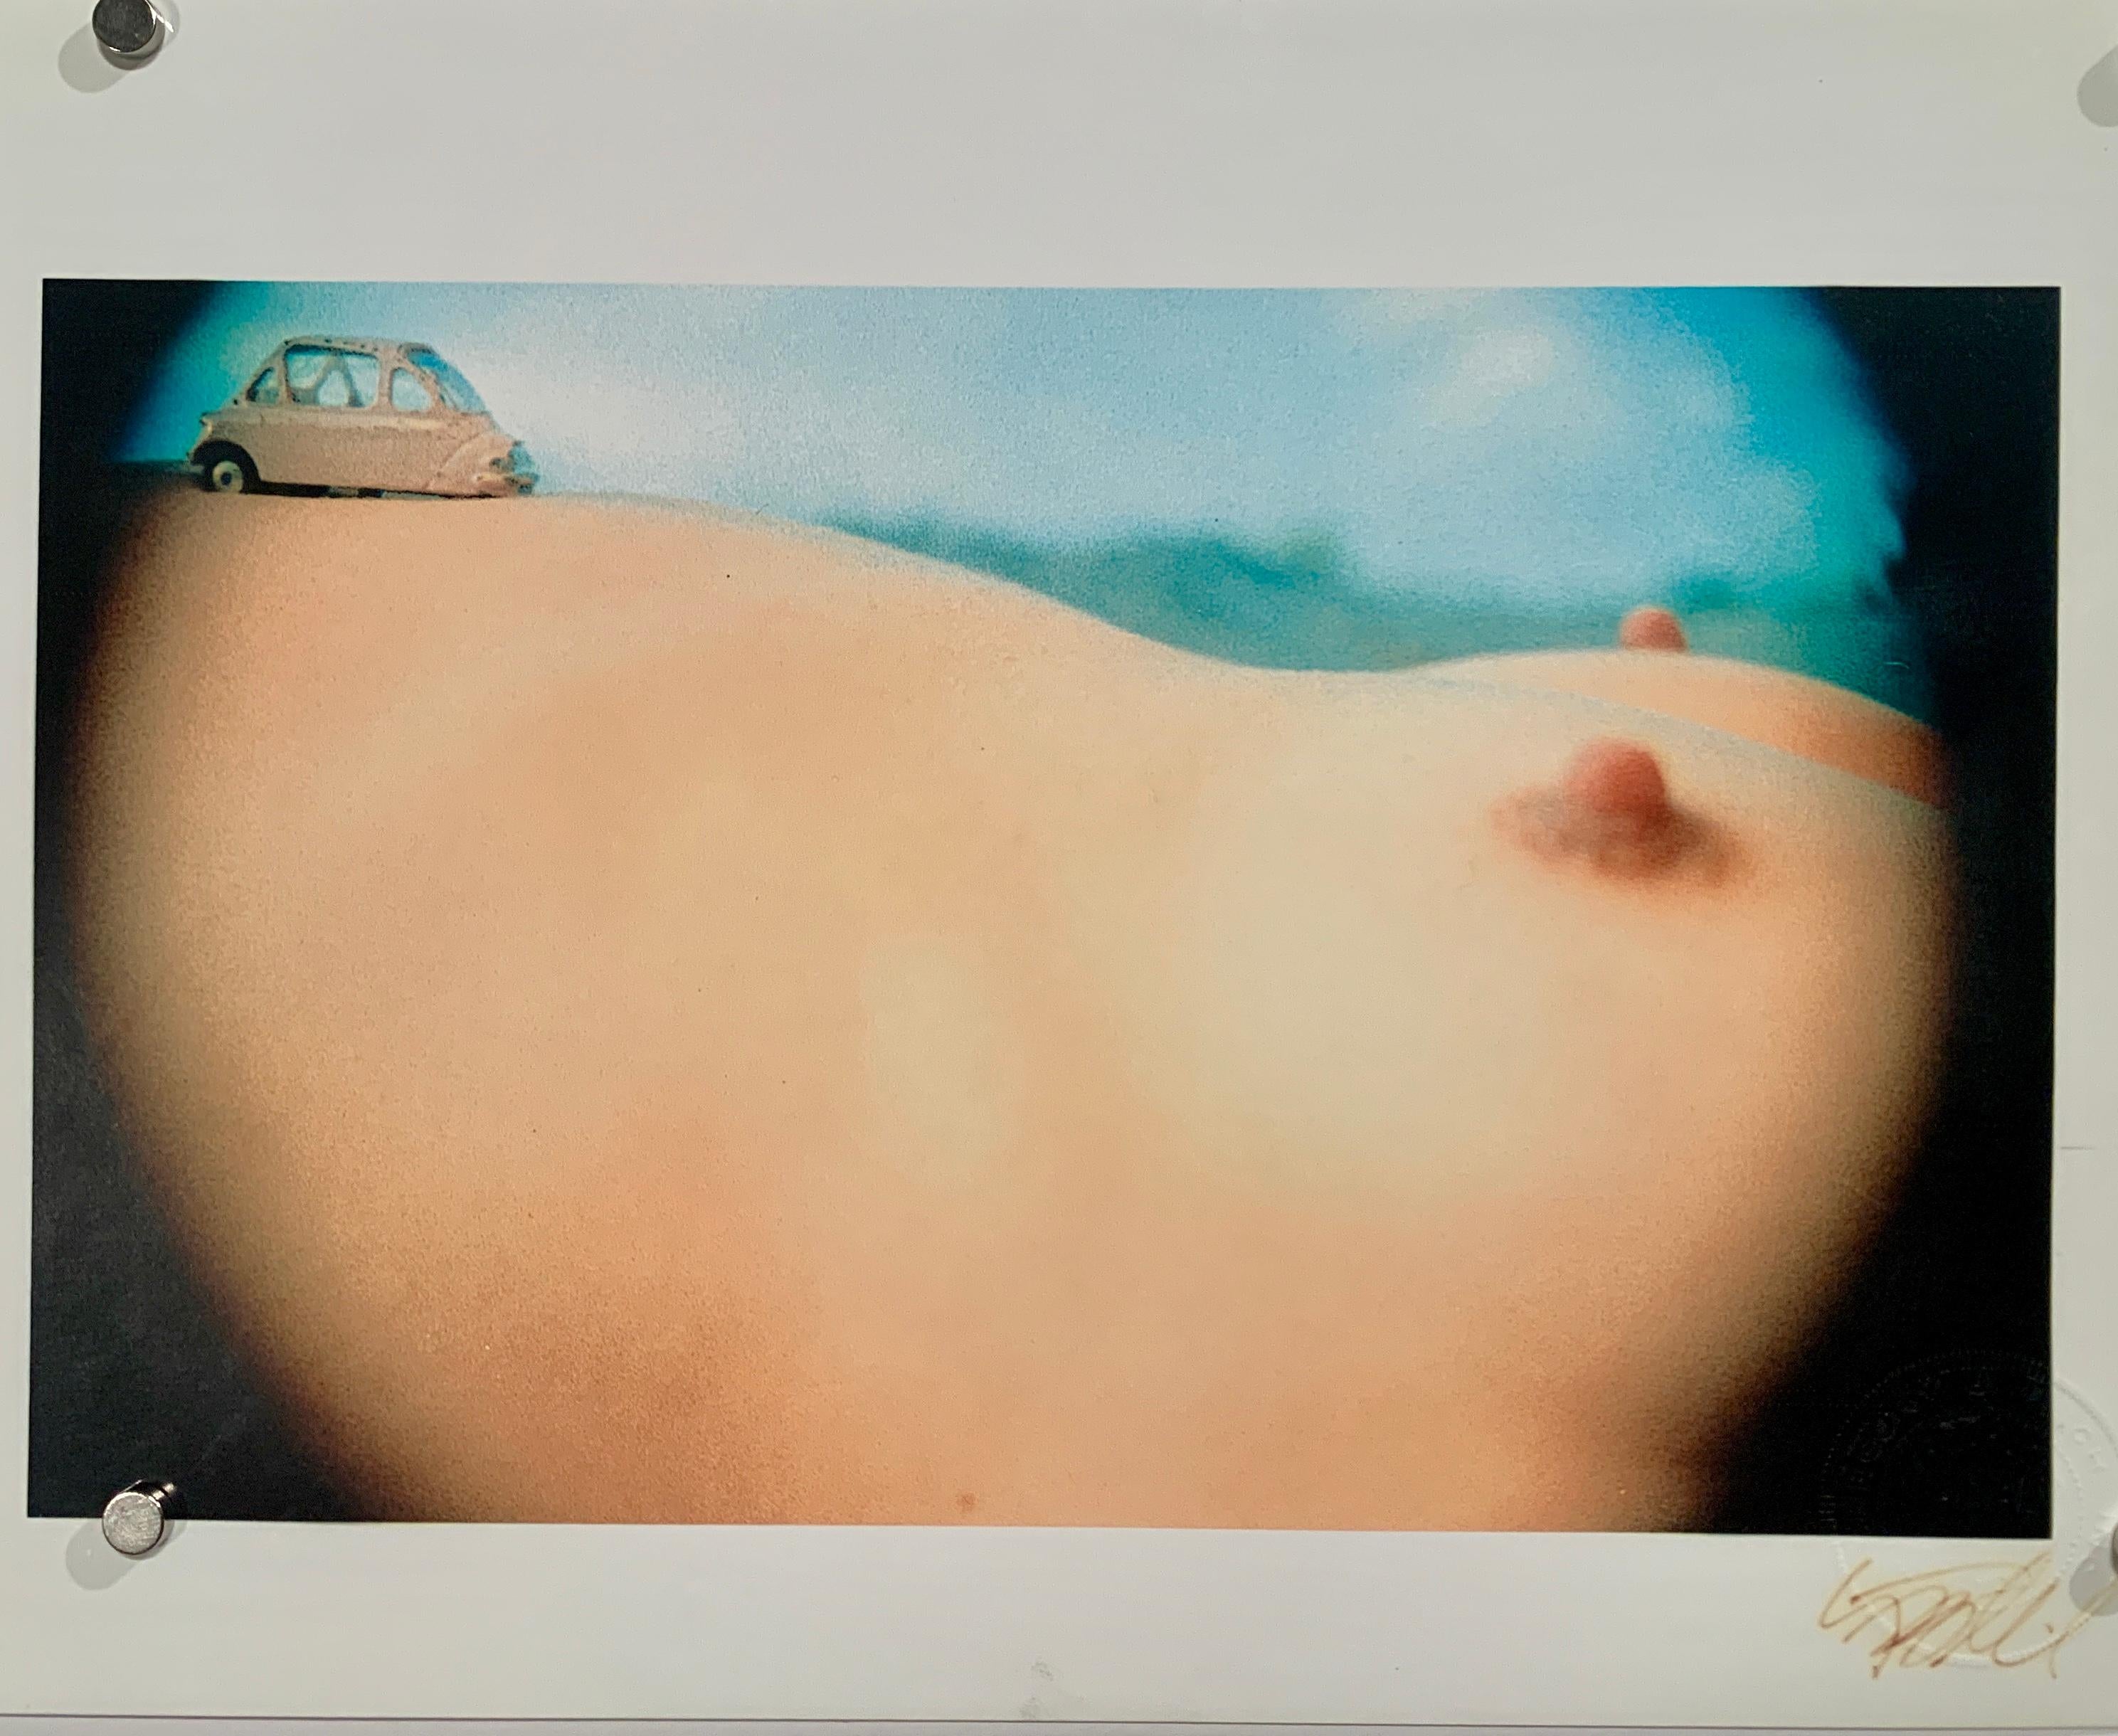 Greg Ilich
"Tank Fight"
1996
Color photograph on glossy paper
11"x8.5" unframed
Signed in ink lower right
Came from artist's estate

